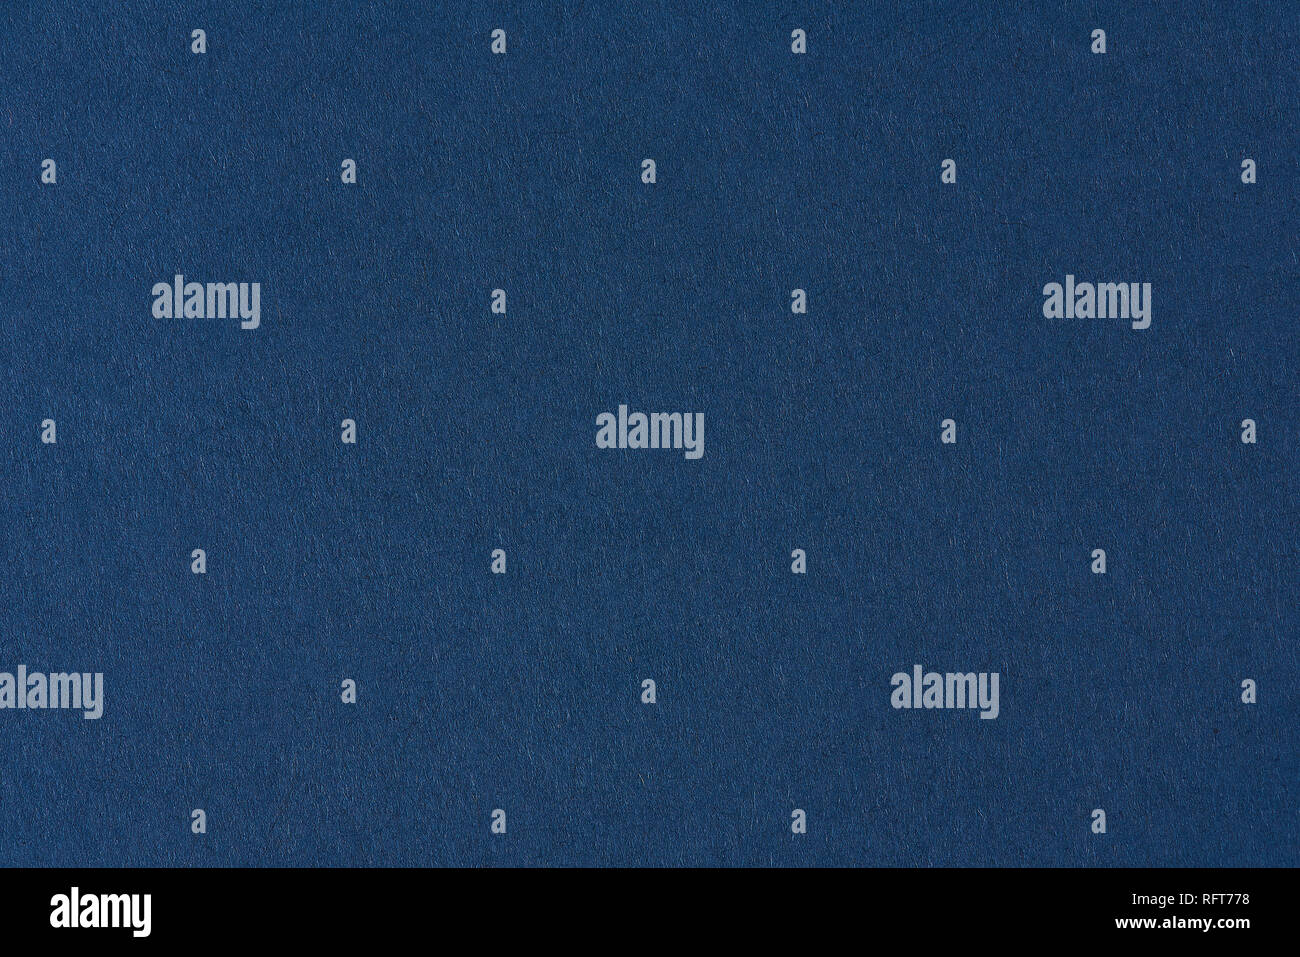 Dark blue seamless paper background close up view Stock Photo